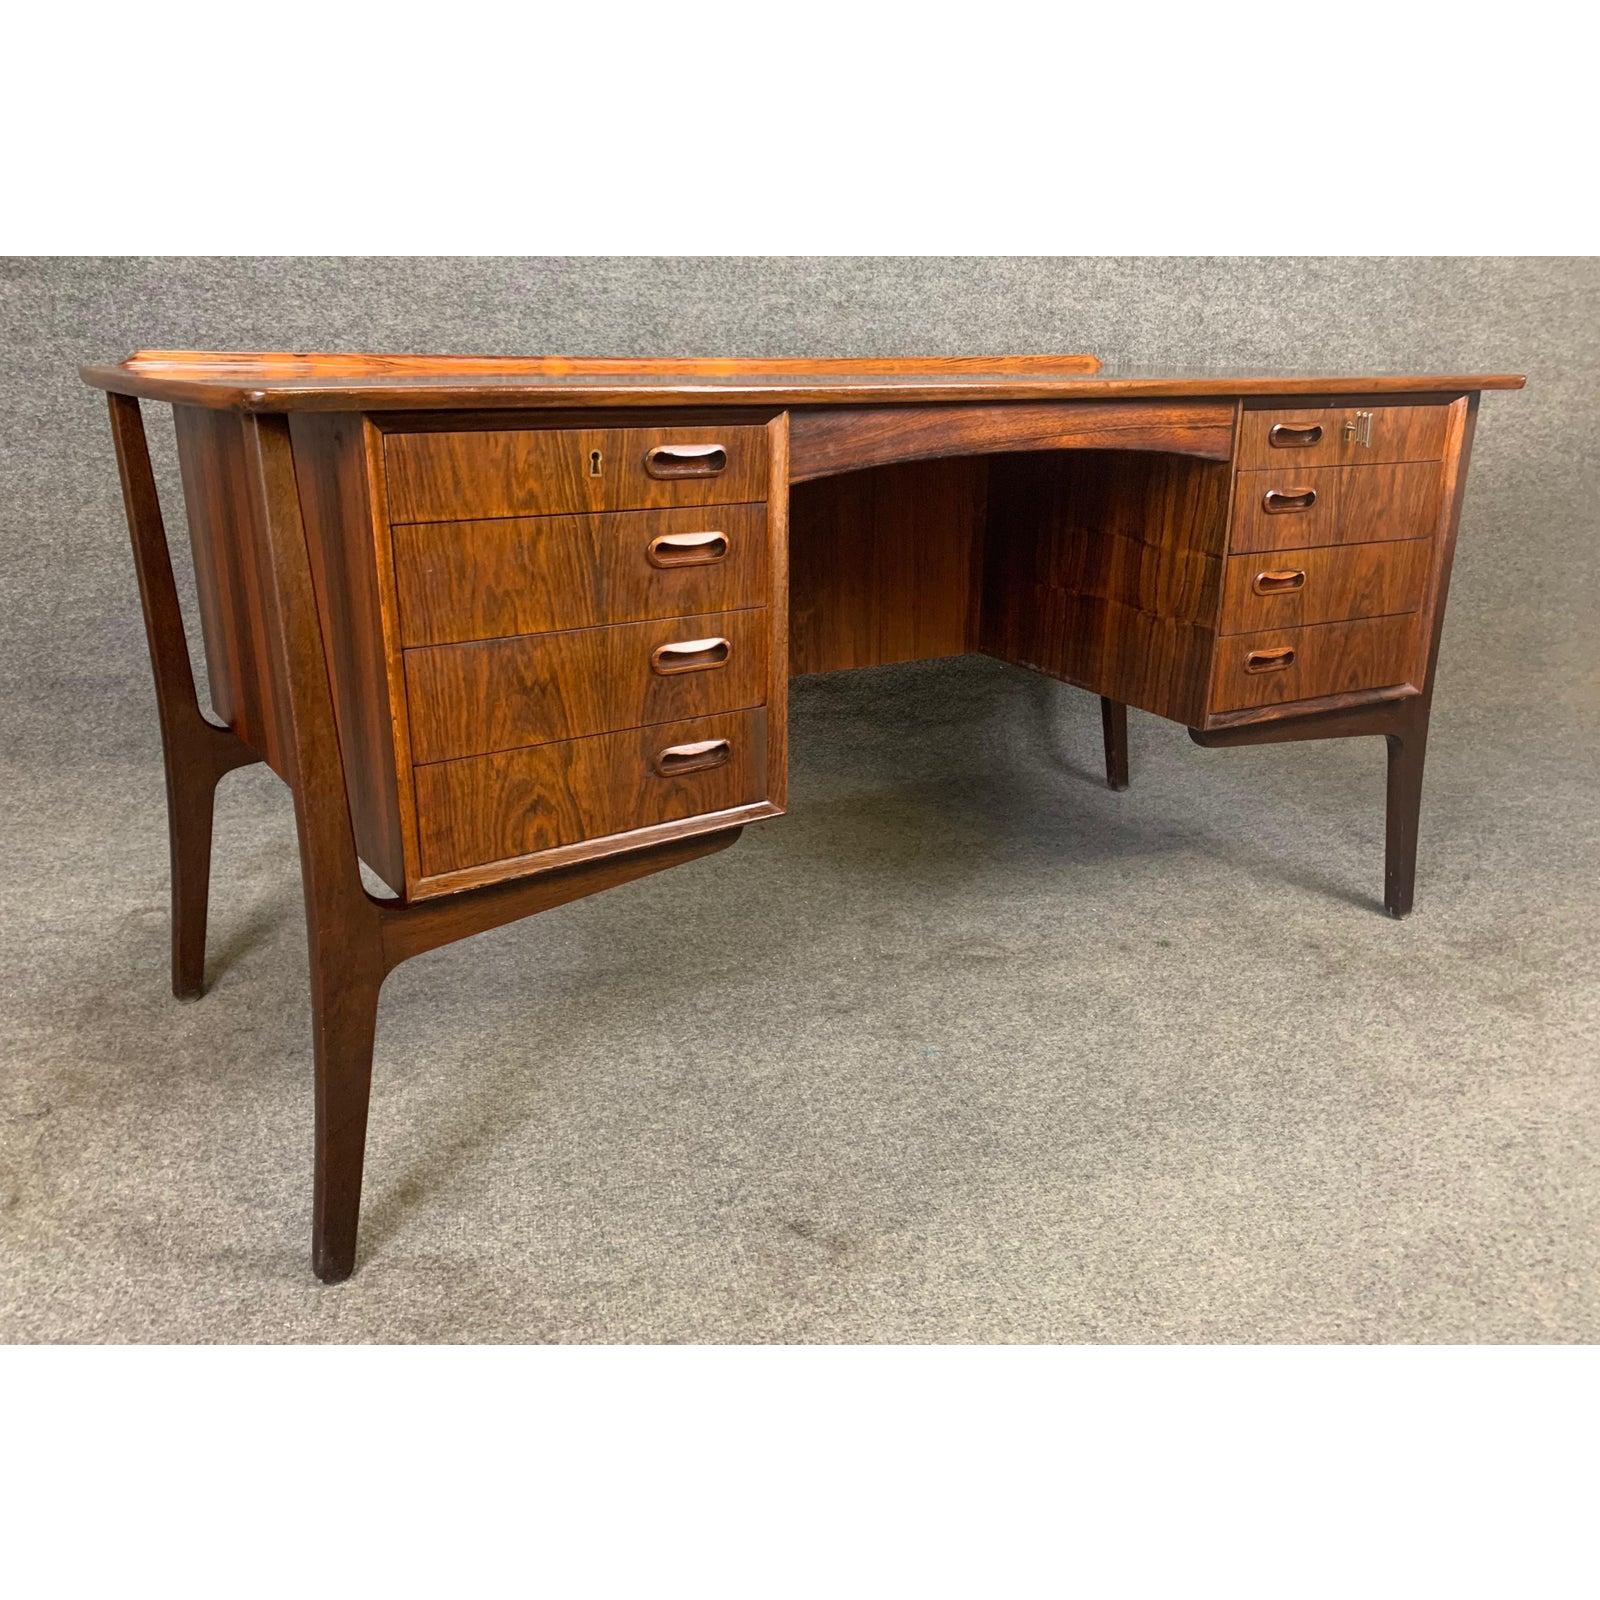 Here's an exclusive Scandinavian Modern executive desk in Brazilian rosewood designed by Svend Madsen and manufactured by HP Hansen in Denmark in the 1960s. This beautiful desk features a bowed large top with vibrant wood grain and a raised lip